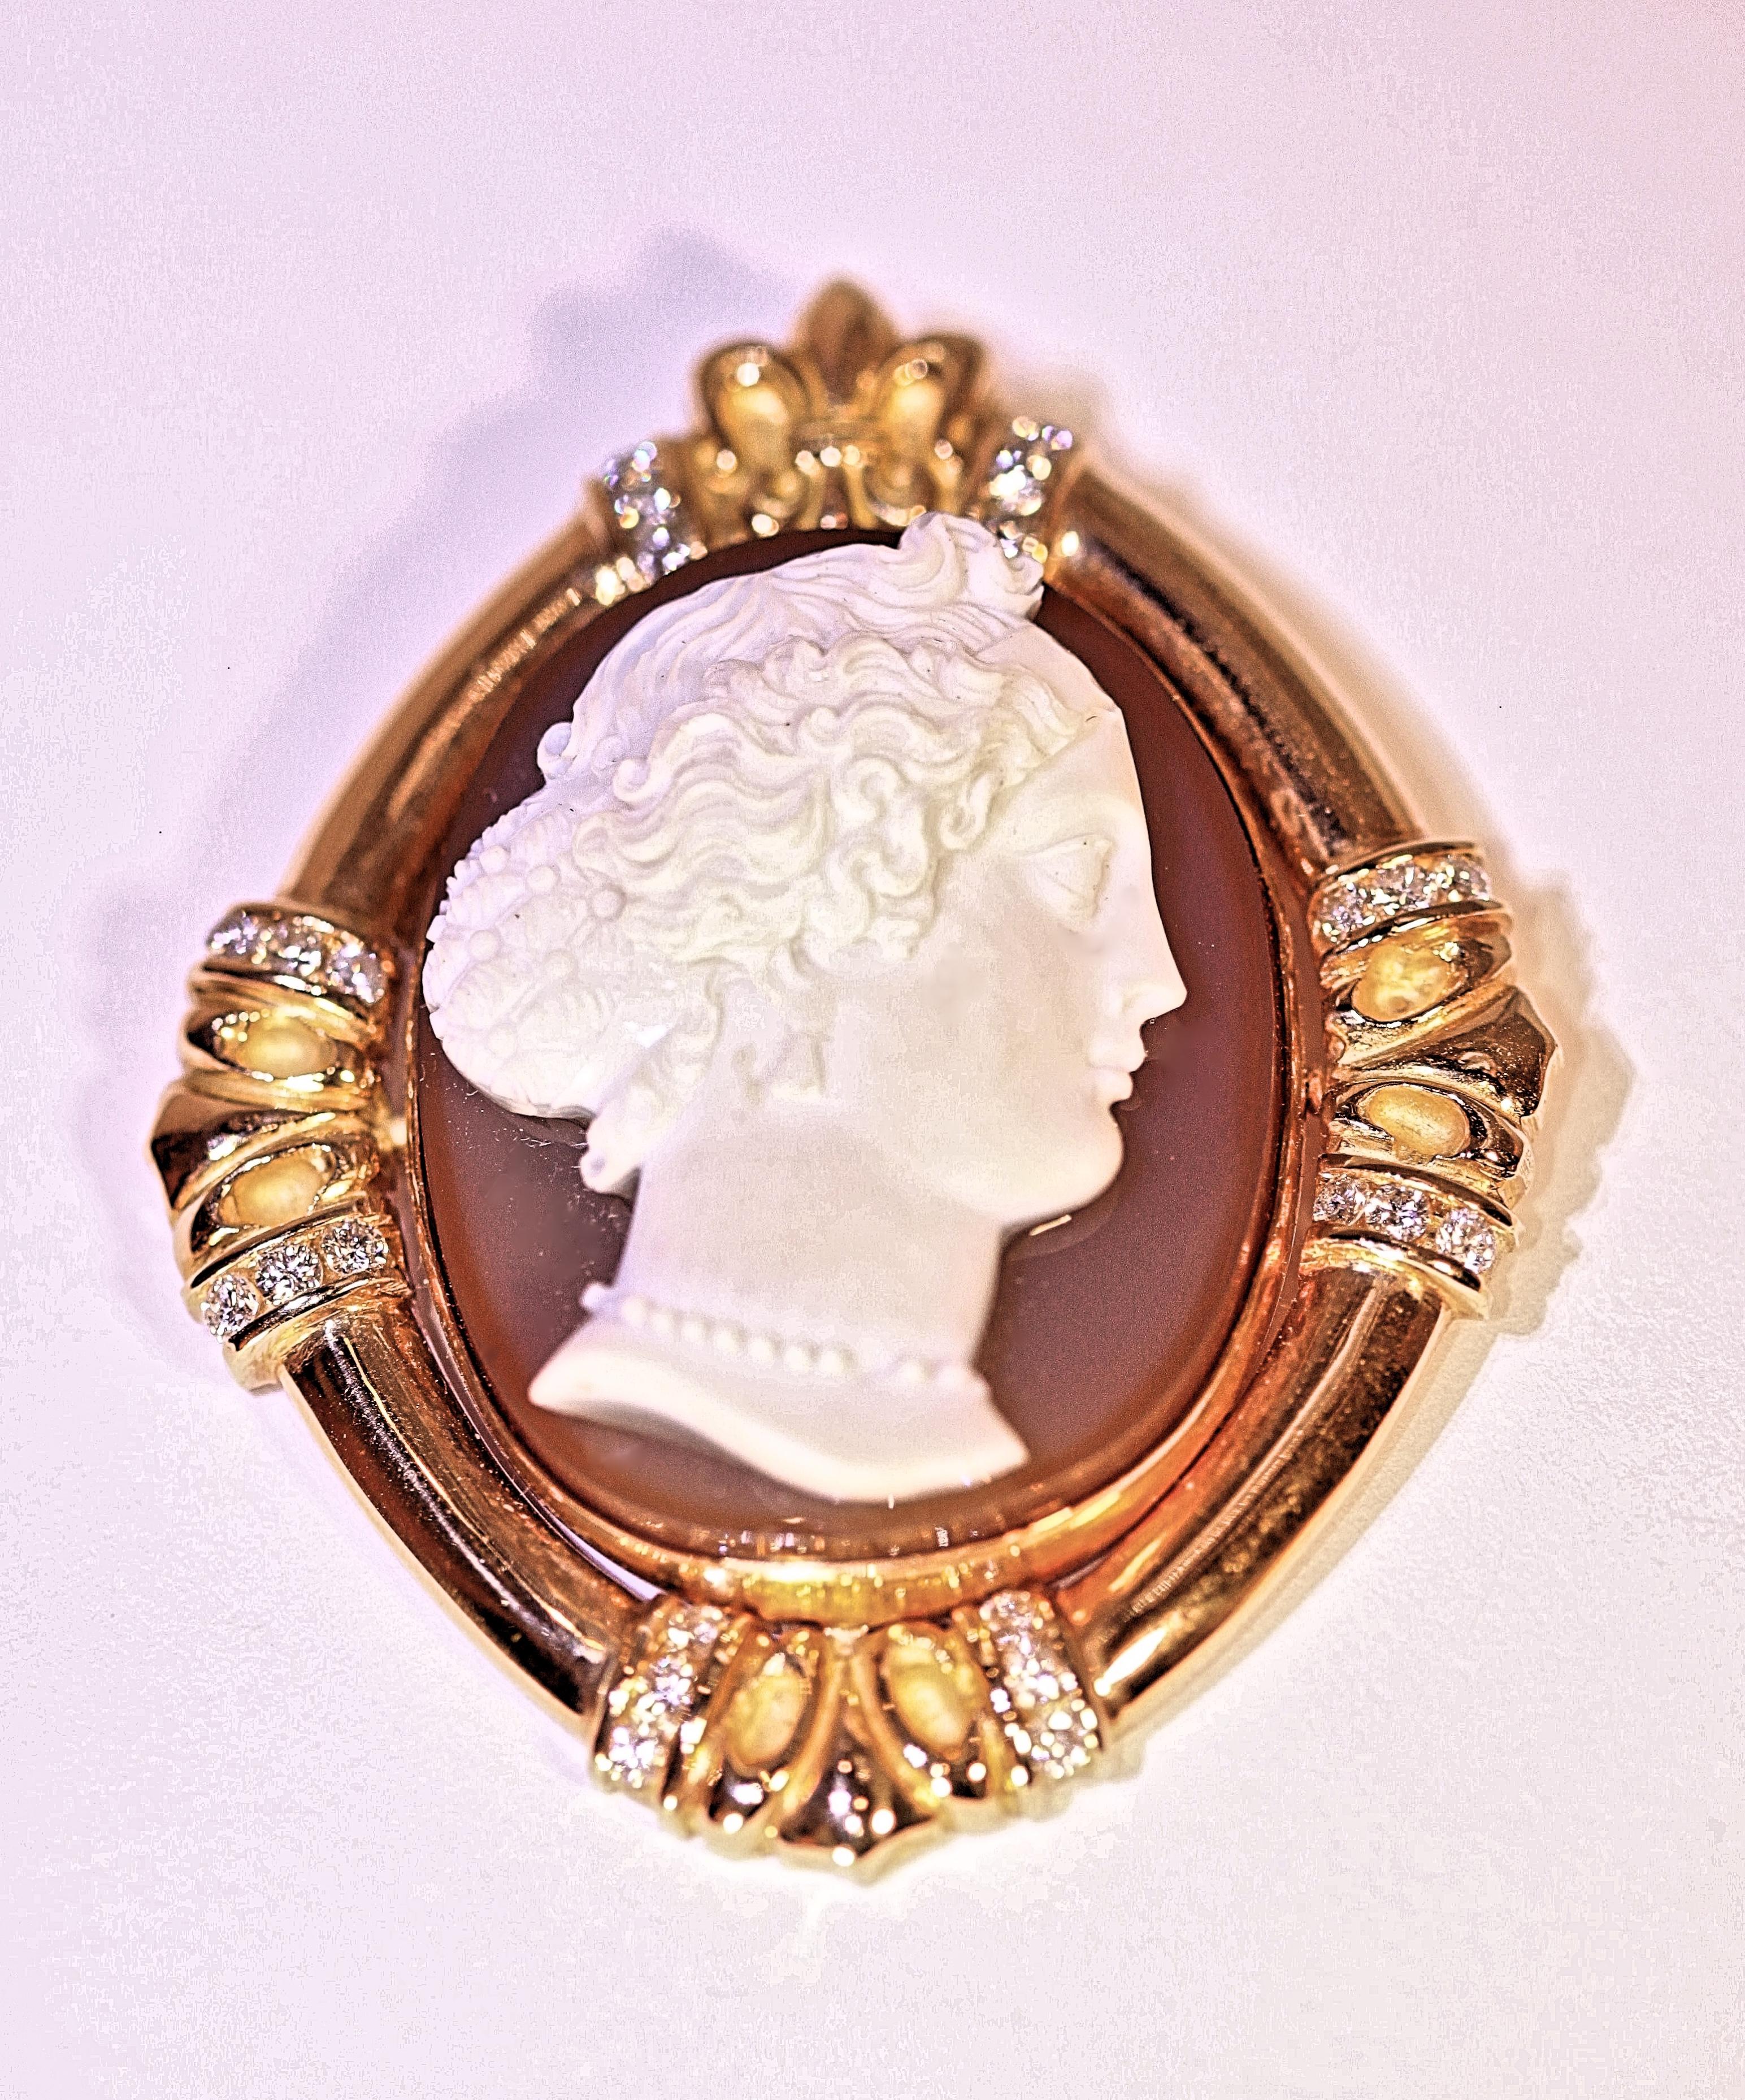 A piece from my personal collection and one of my favorites.  When worn, it was truly a conversation piece.  The center is an`antique French agate cameo surrounded by 18 karat 
yellow gold with accent diamonds.  The pendant is beautifully hand made